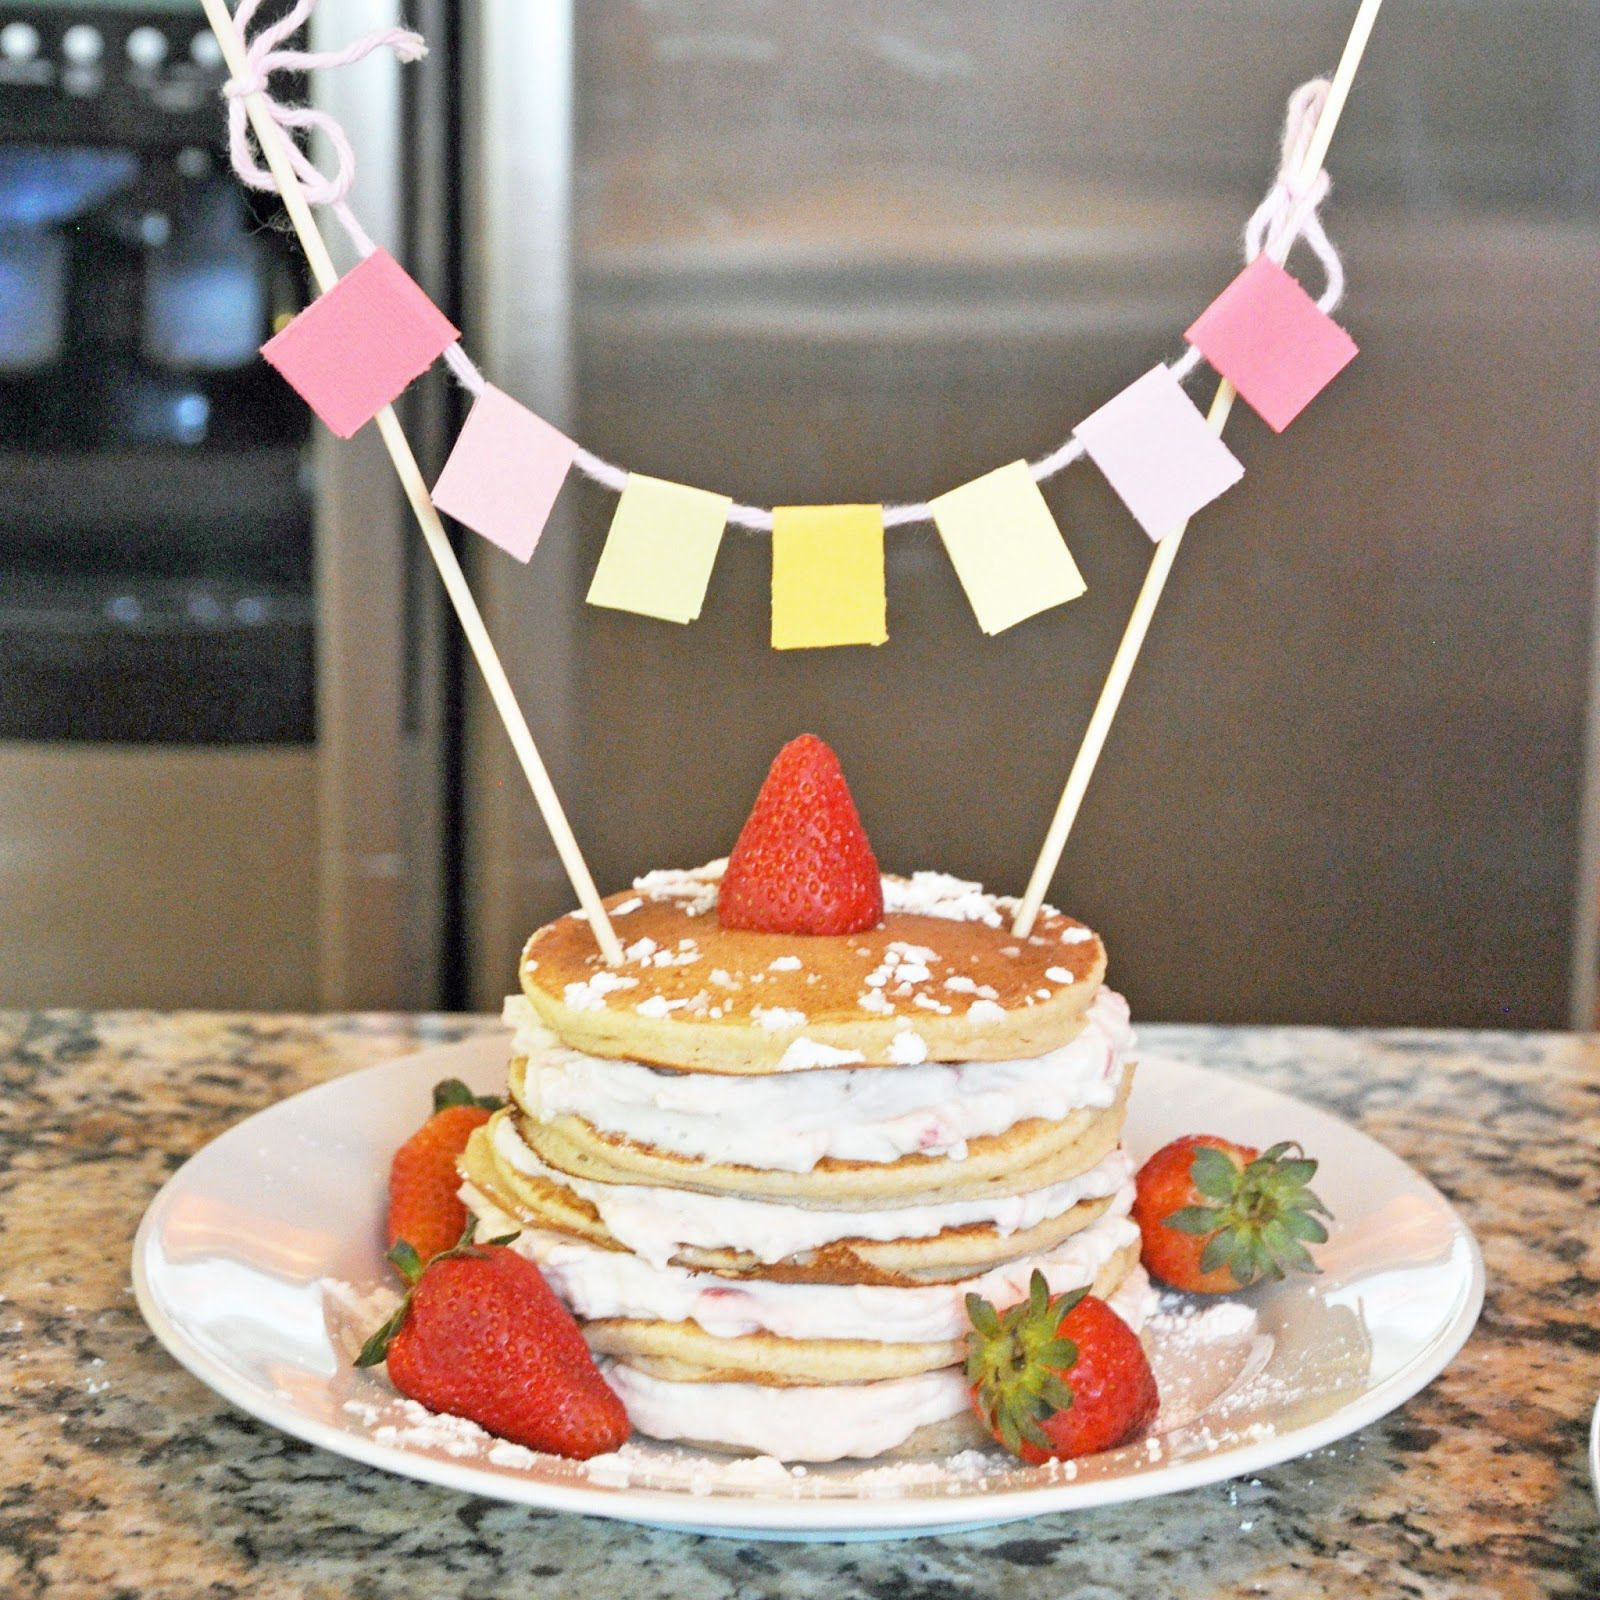 Birthday Breakfast Recipes
 Birthday breakfast ideas can be given to some one that